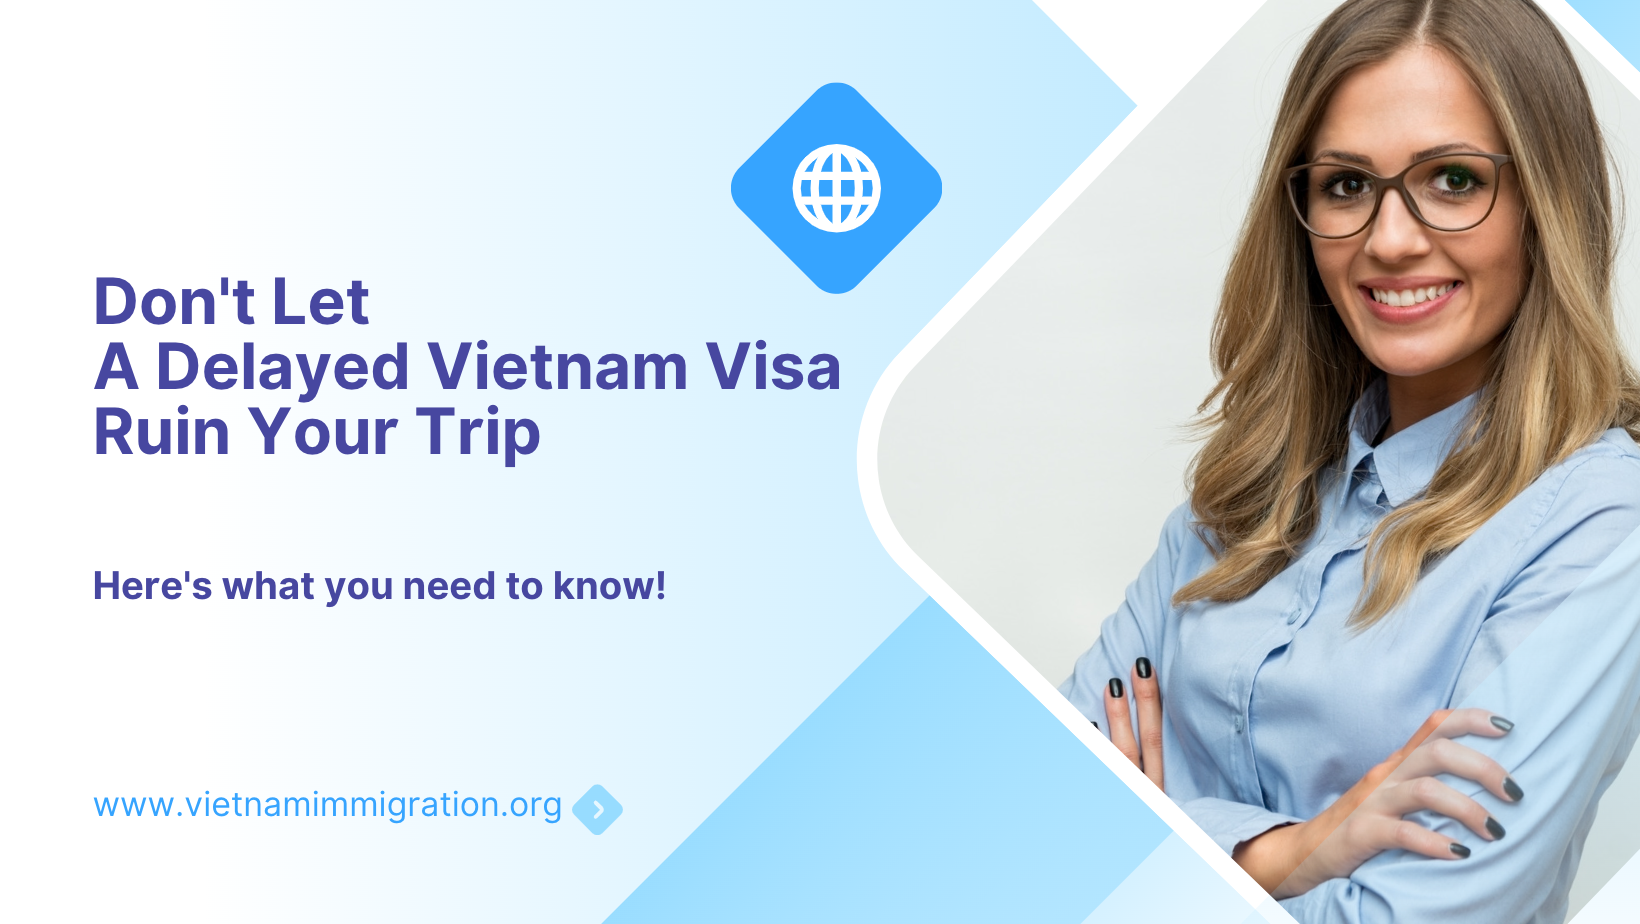 Don't Let a Delayed Vietnam Visa Ruin Your Trip: Here's what you need to know!